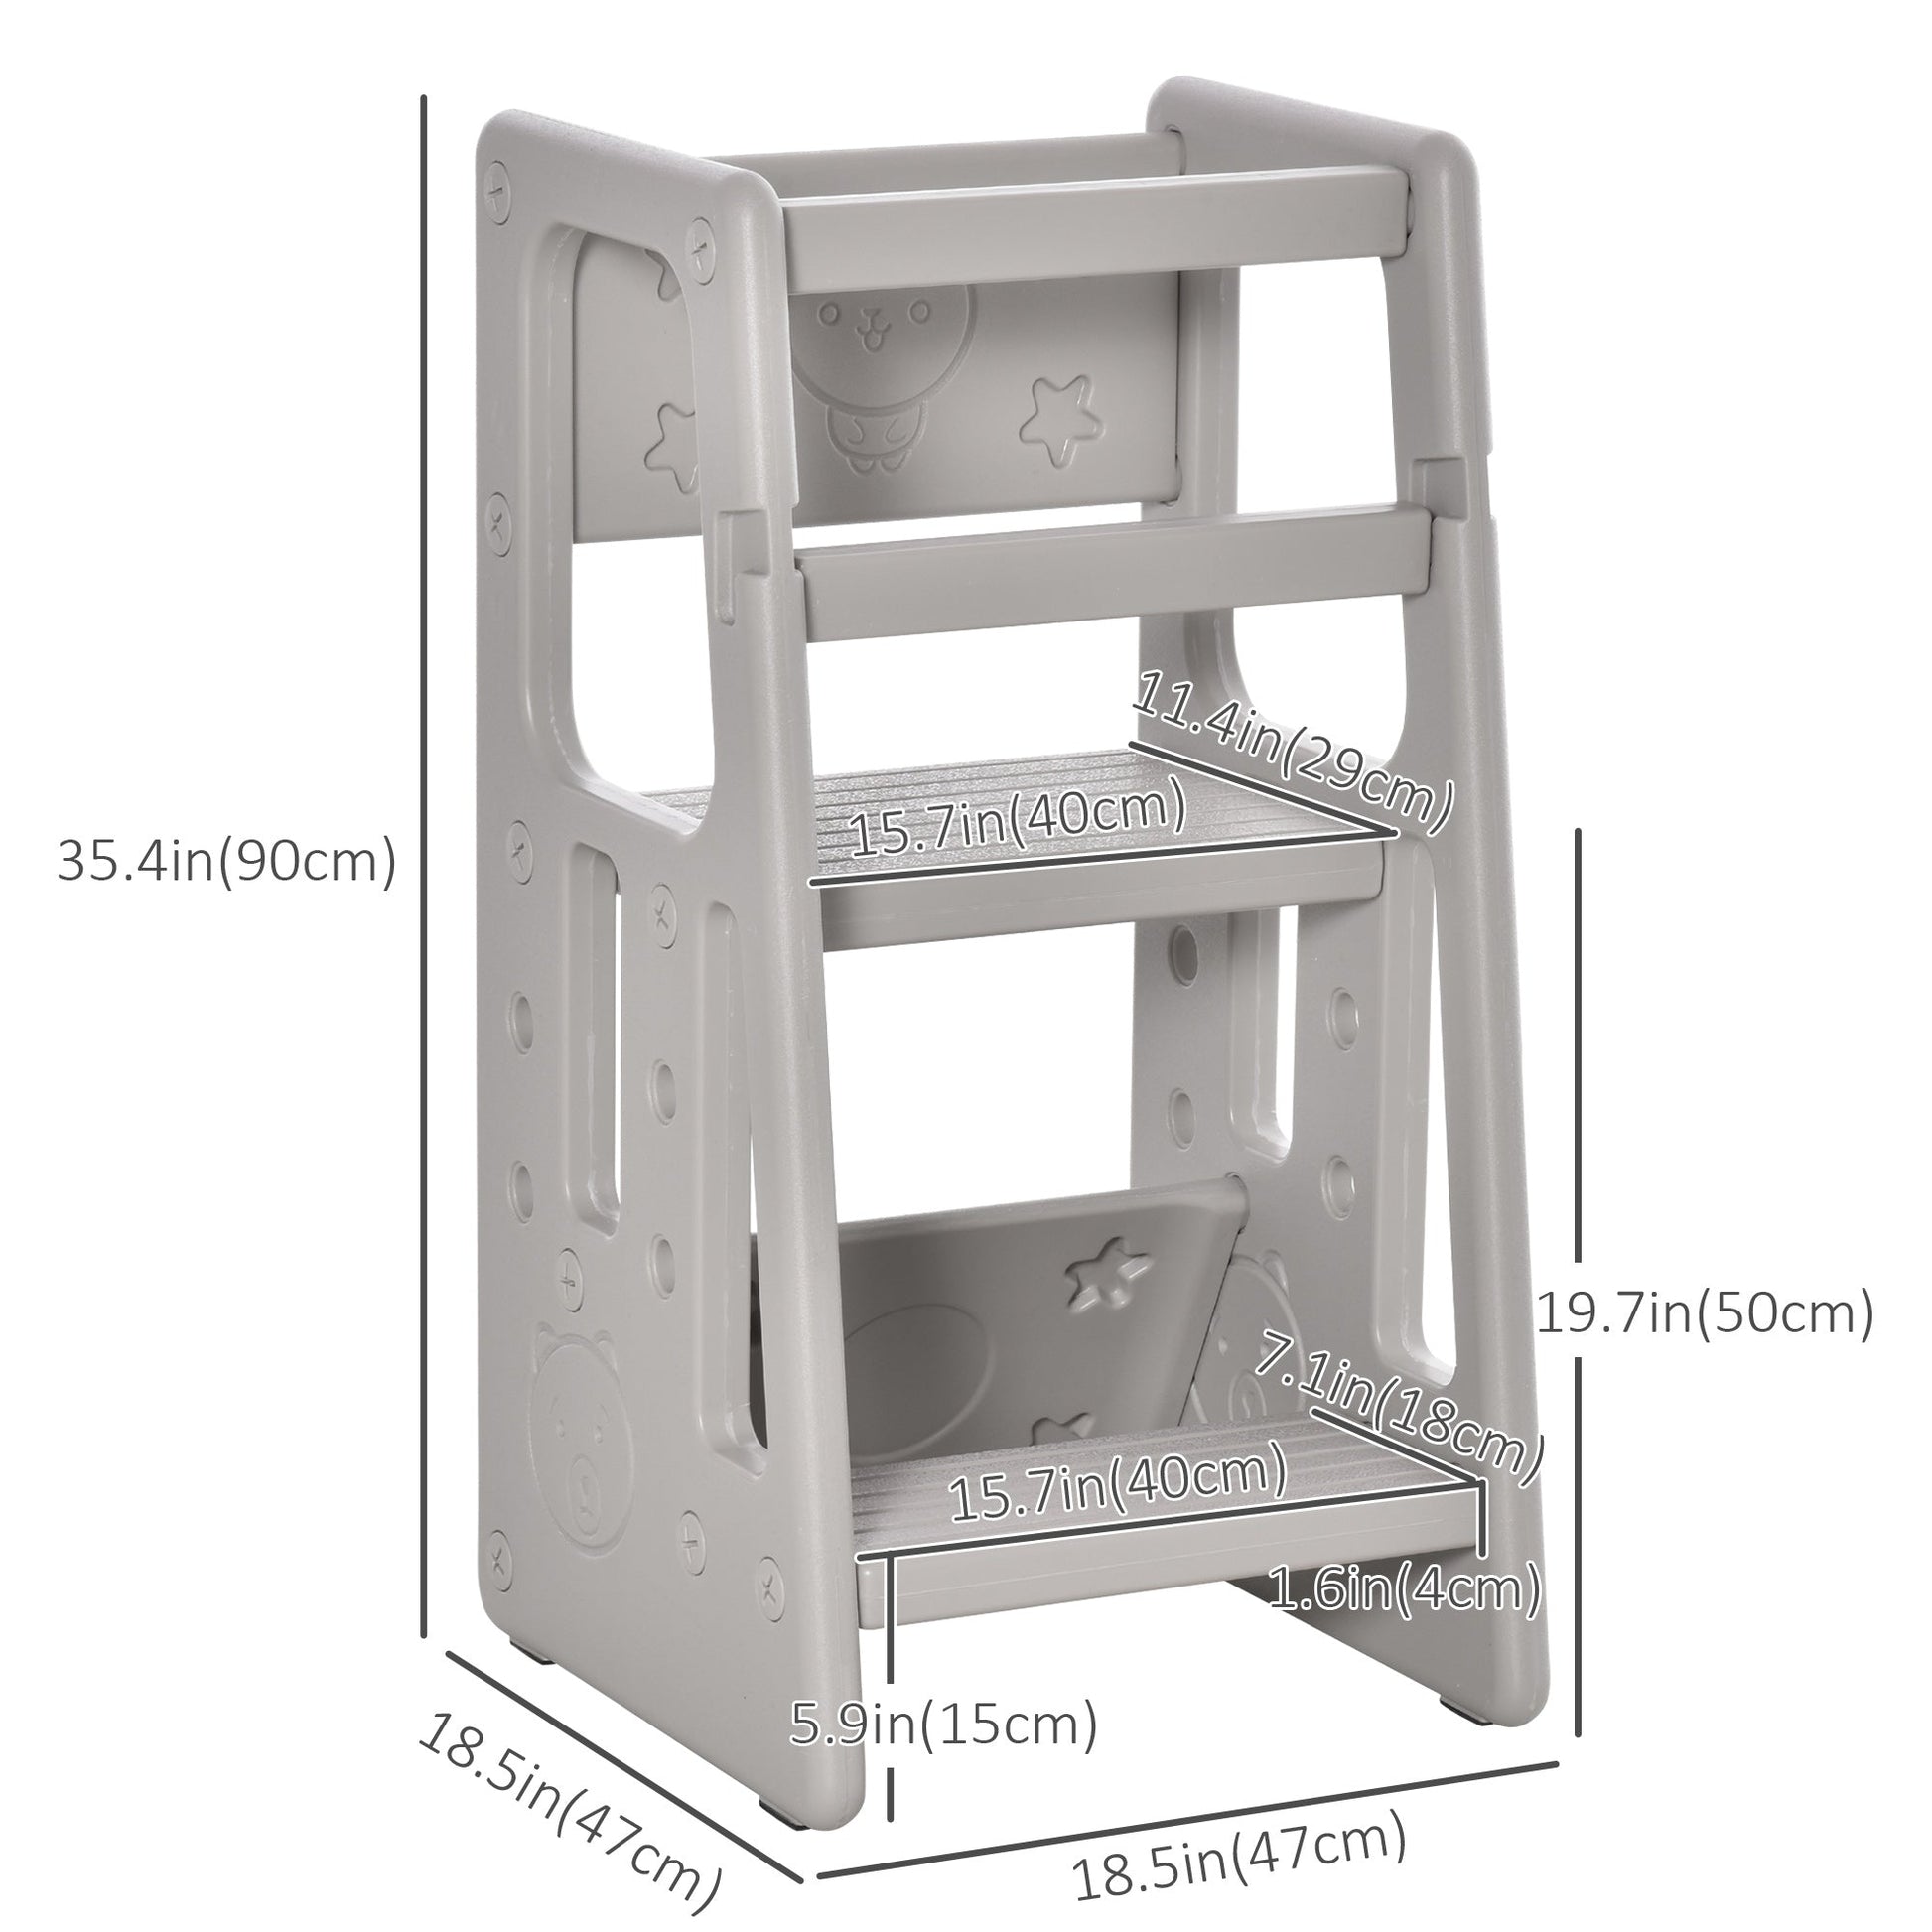 Toddler Kitchen Helper 2 Step Stool with Adjustable Height Platform and Safety Rail, Grey at Gallery Canada